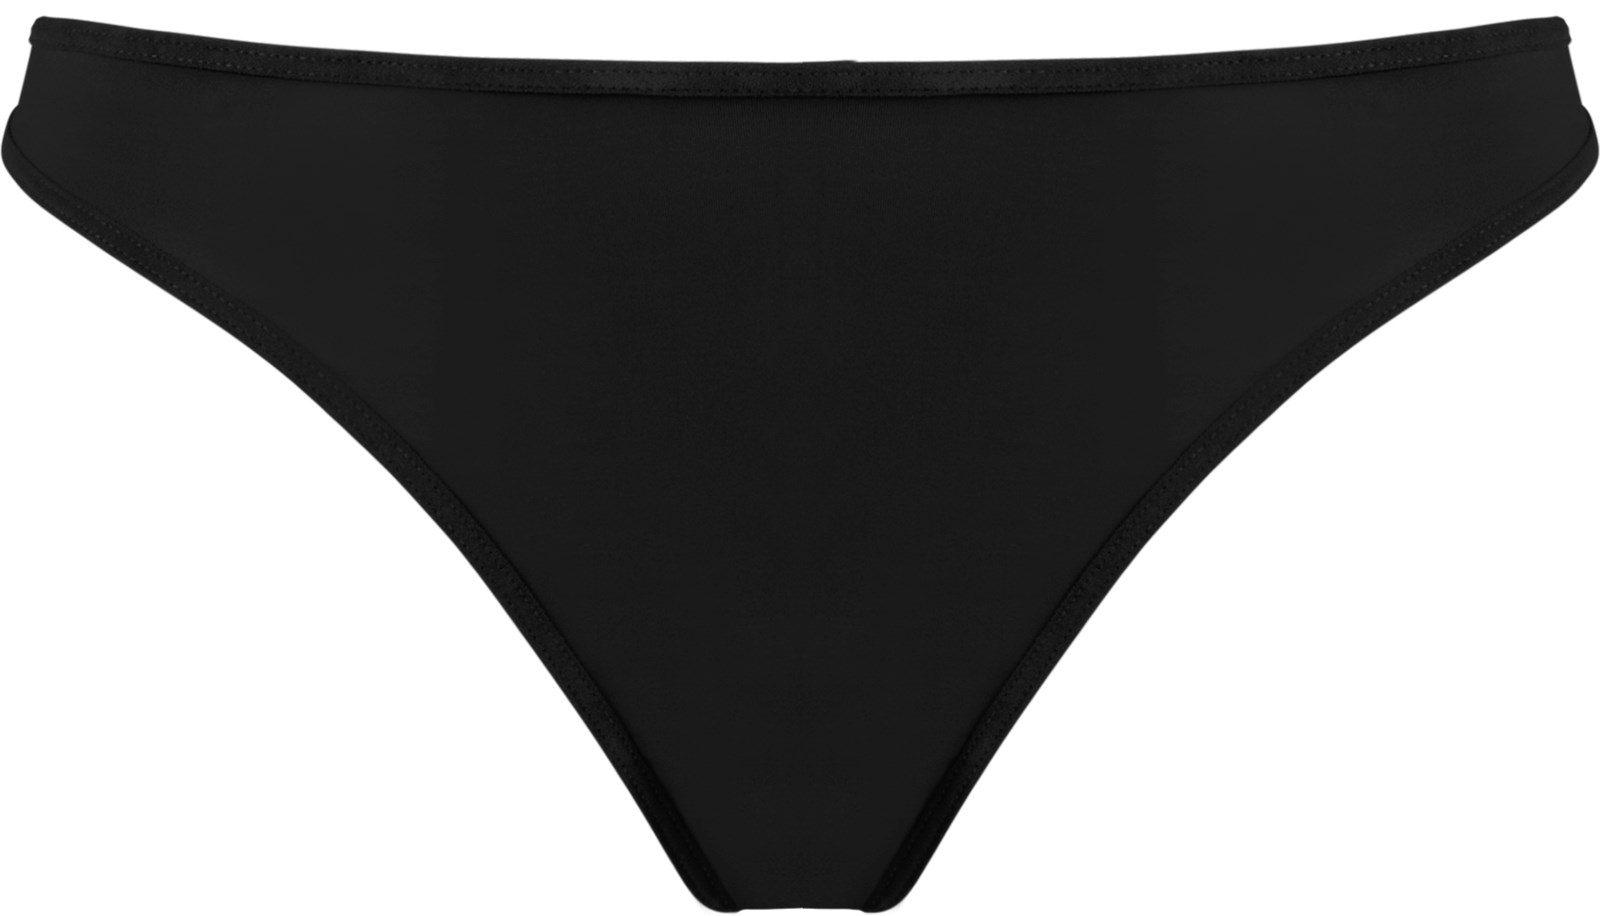 Space Odyssey Thong - Black